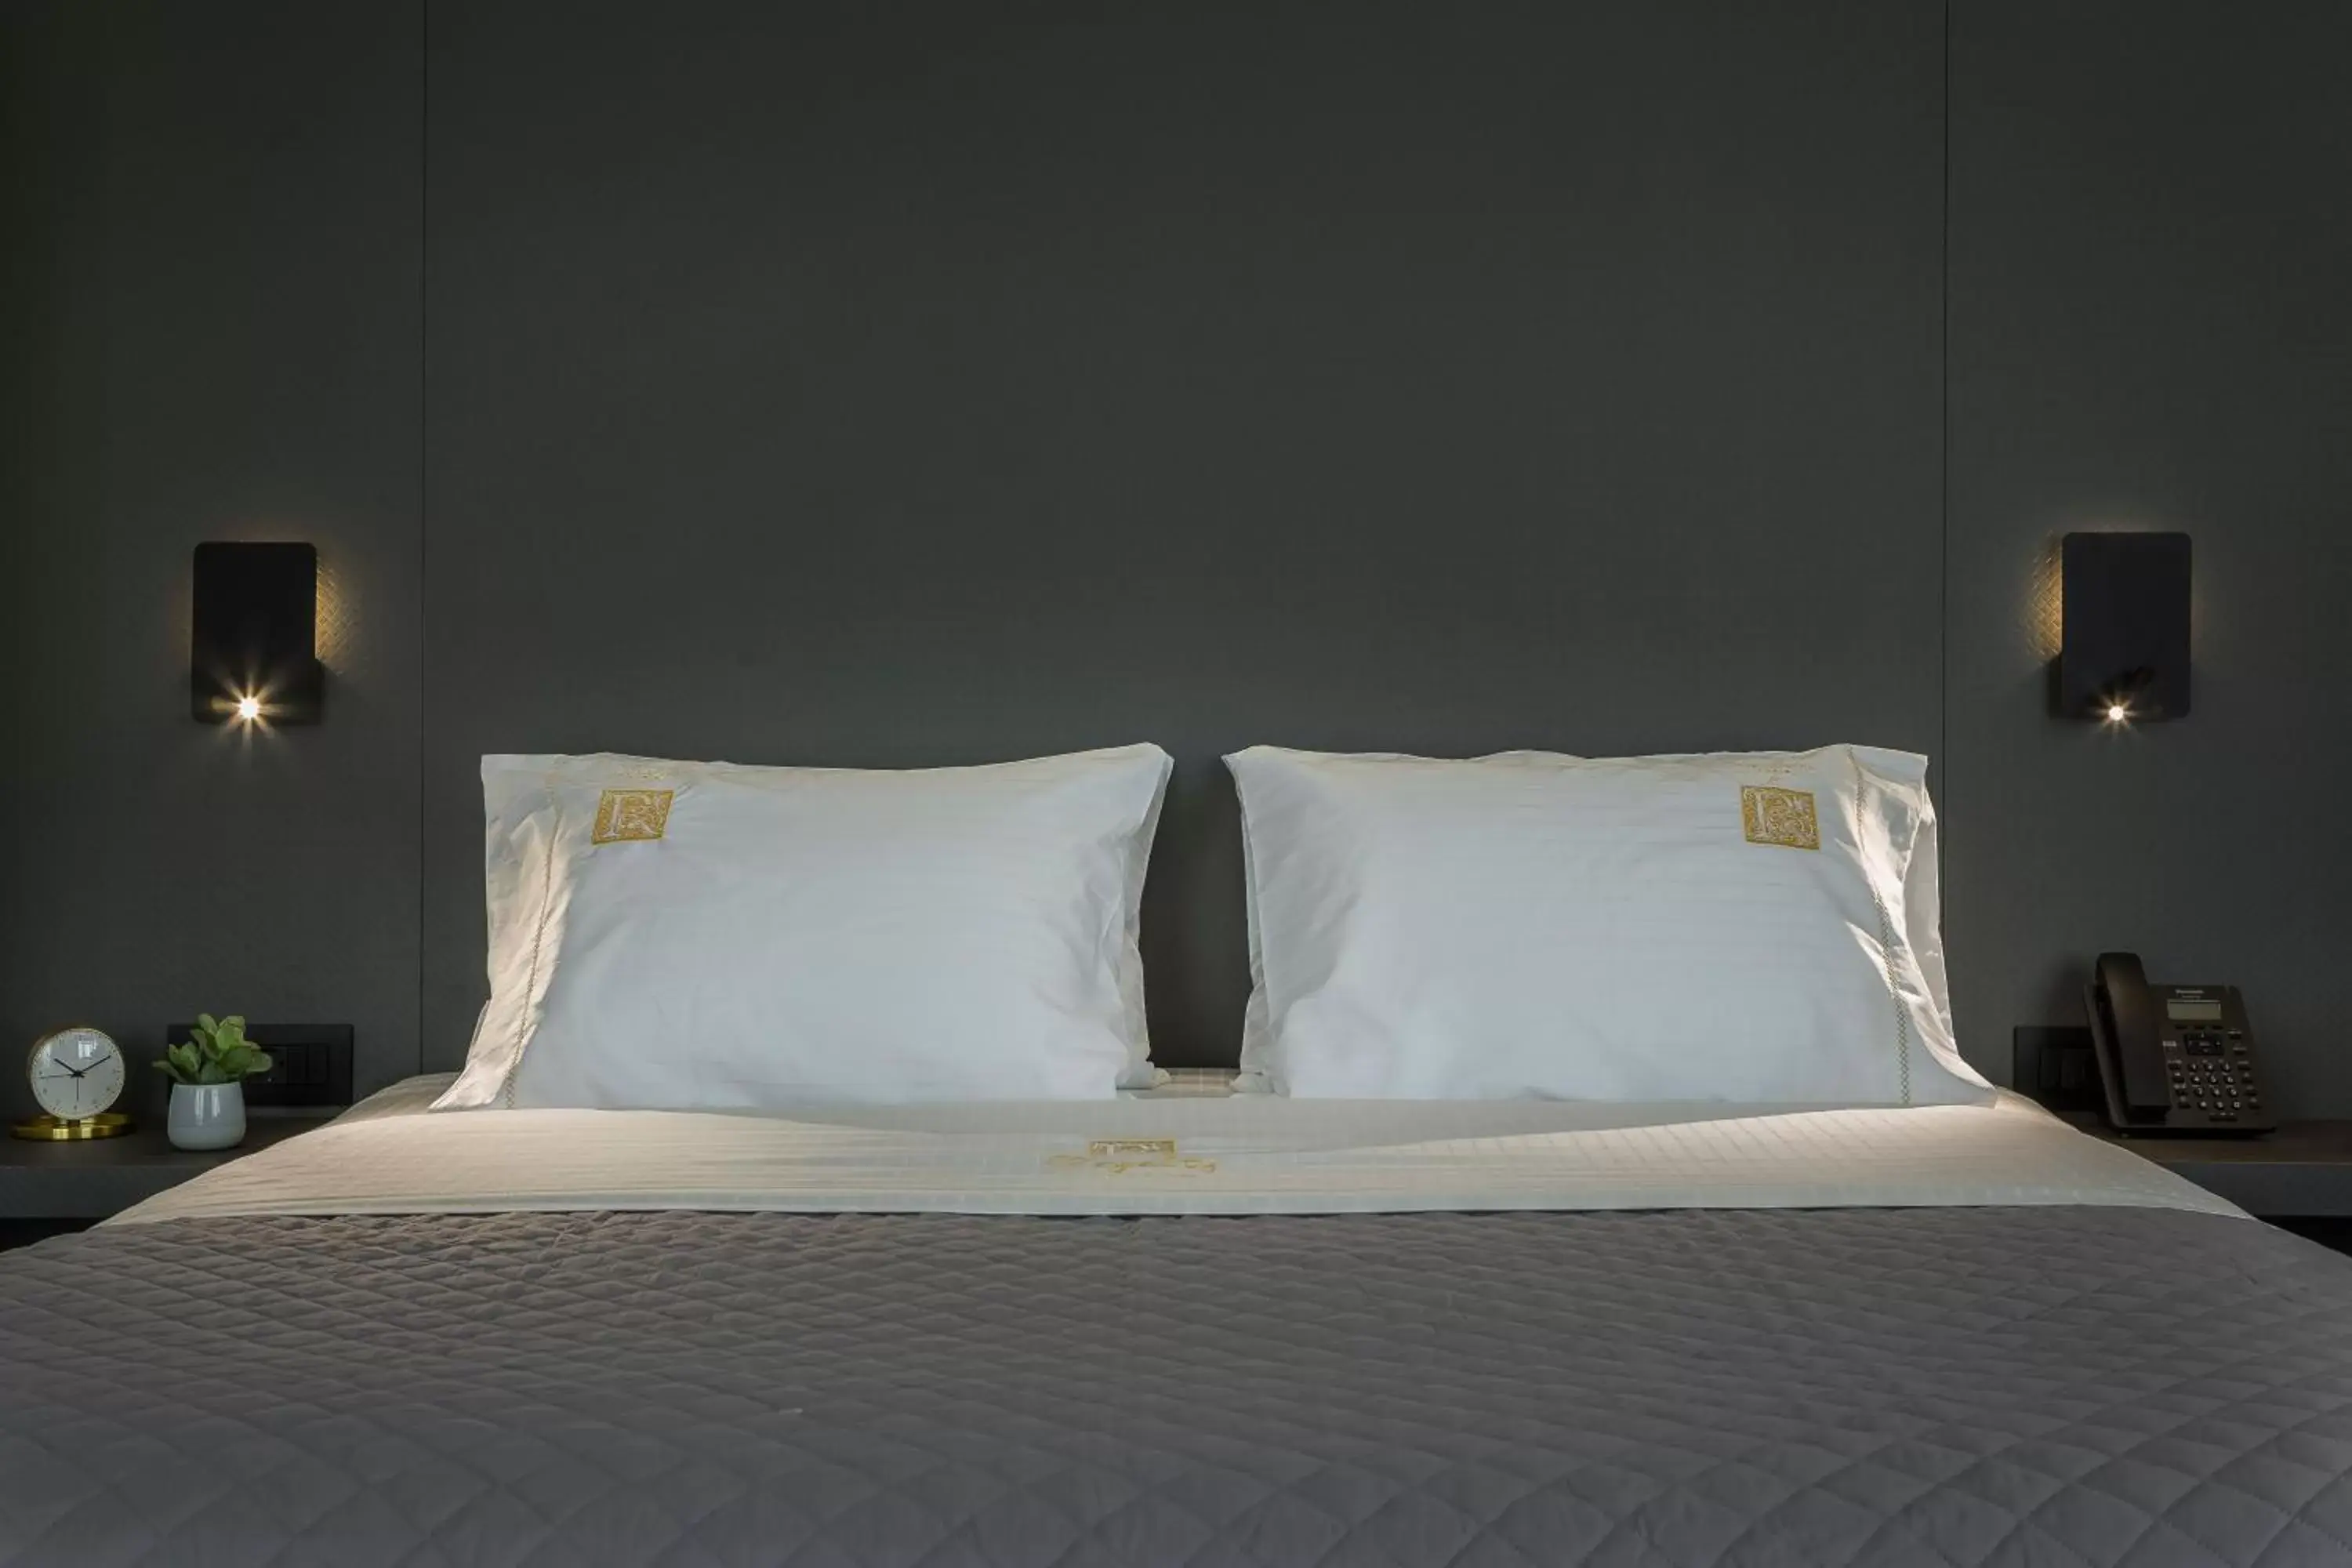 Bed in Royalty Hotel Athens